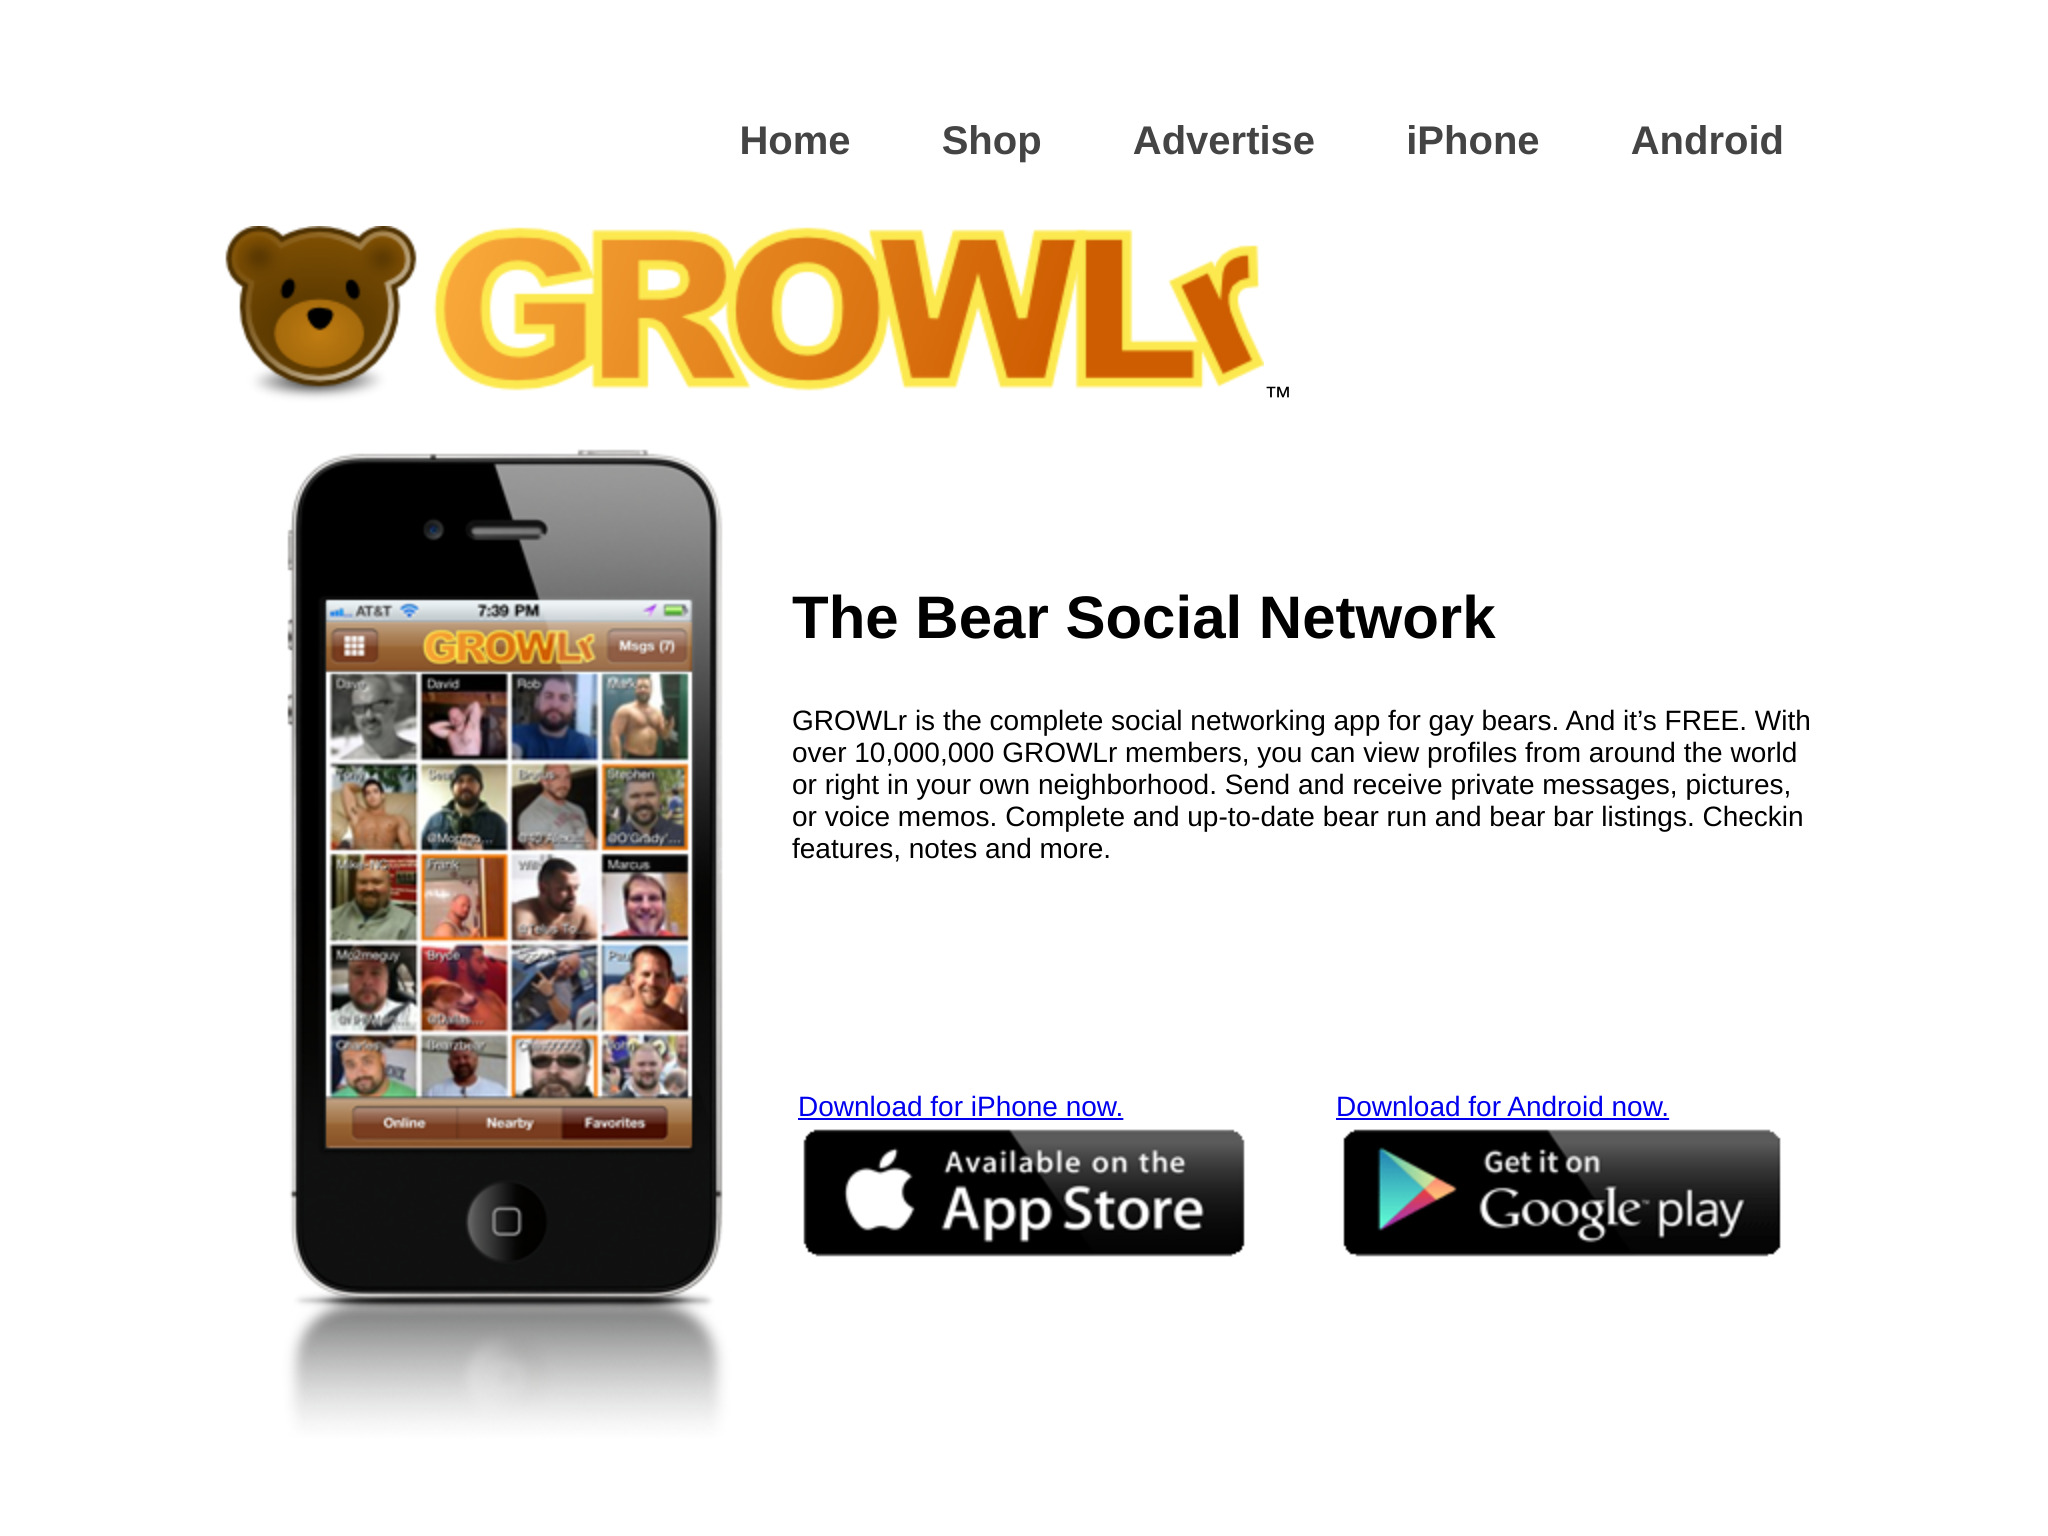 Growlr Review: Is It Worth Trying?